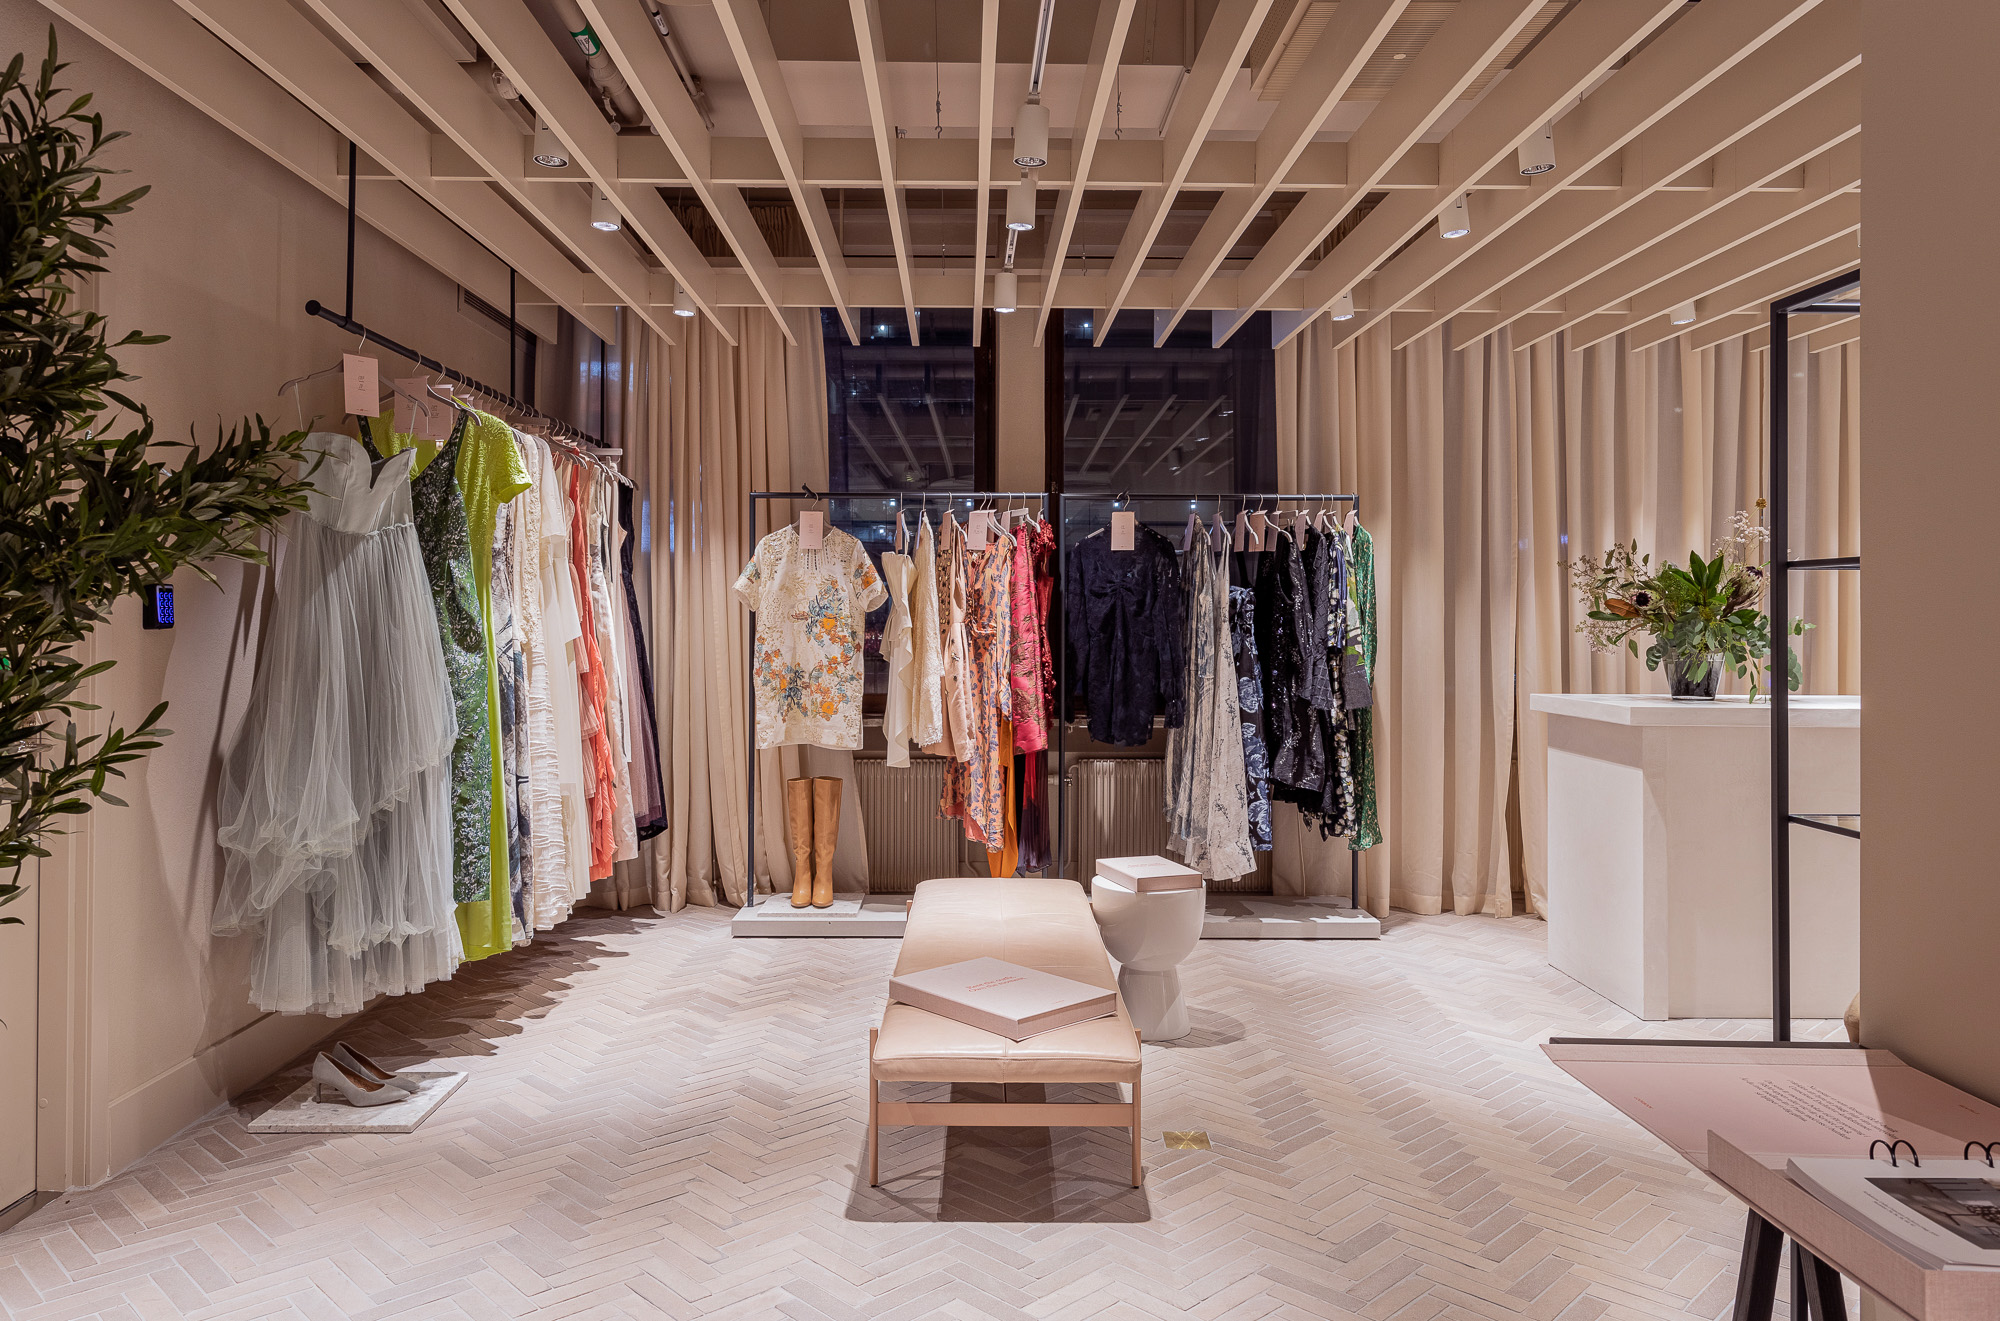 Rental clothing on display at H&M’s flagship store in central Stockholm.